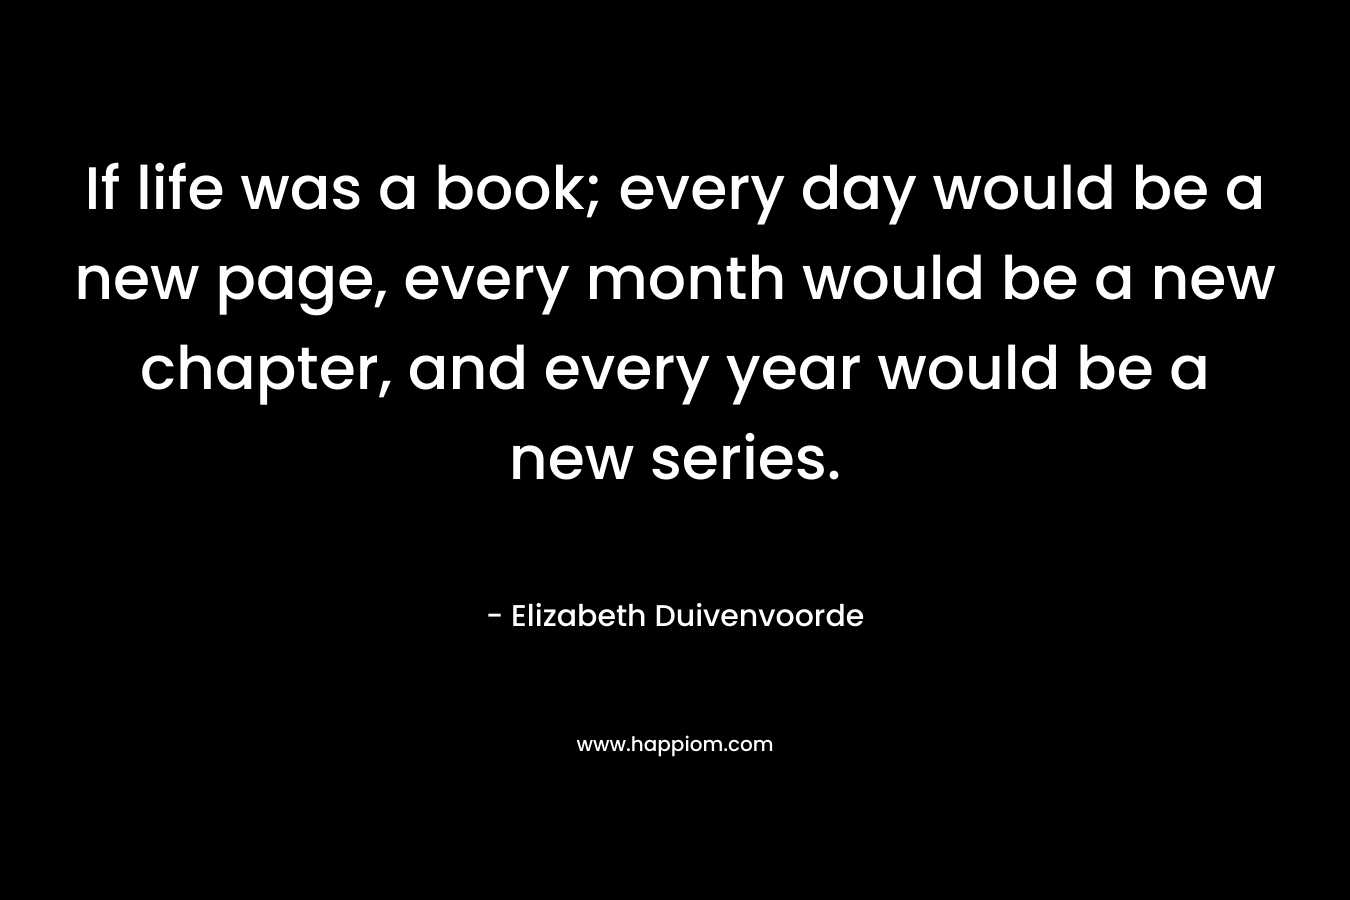 If life was a book; every day would be a new page, every month would be a new chapter, and every year would be a new series. – Elizabeth Duivenvoorde